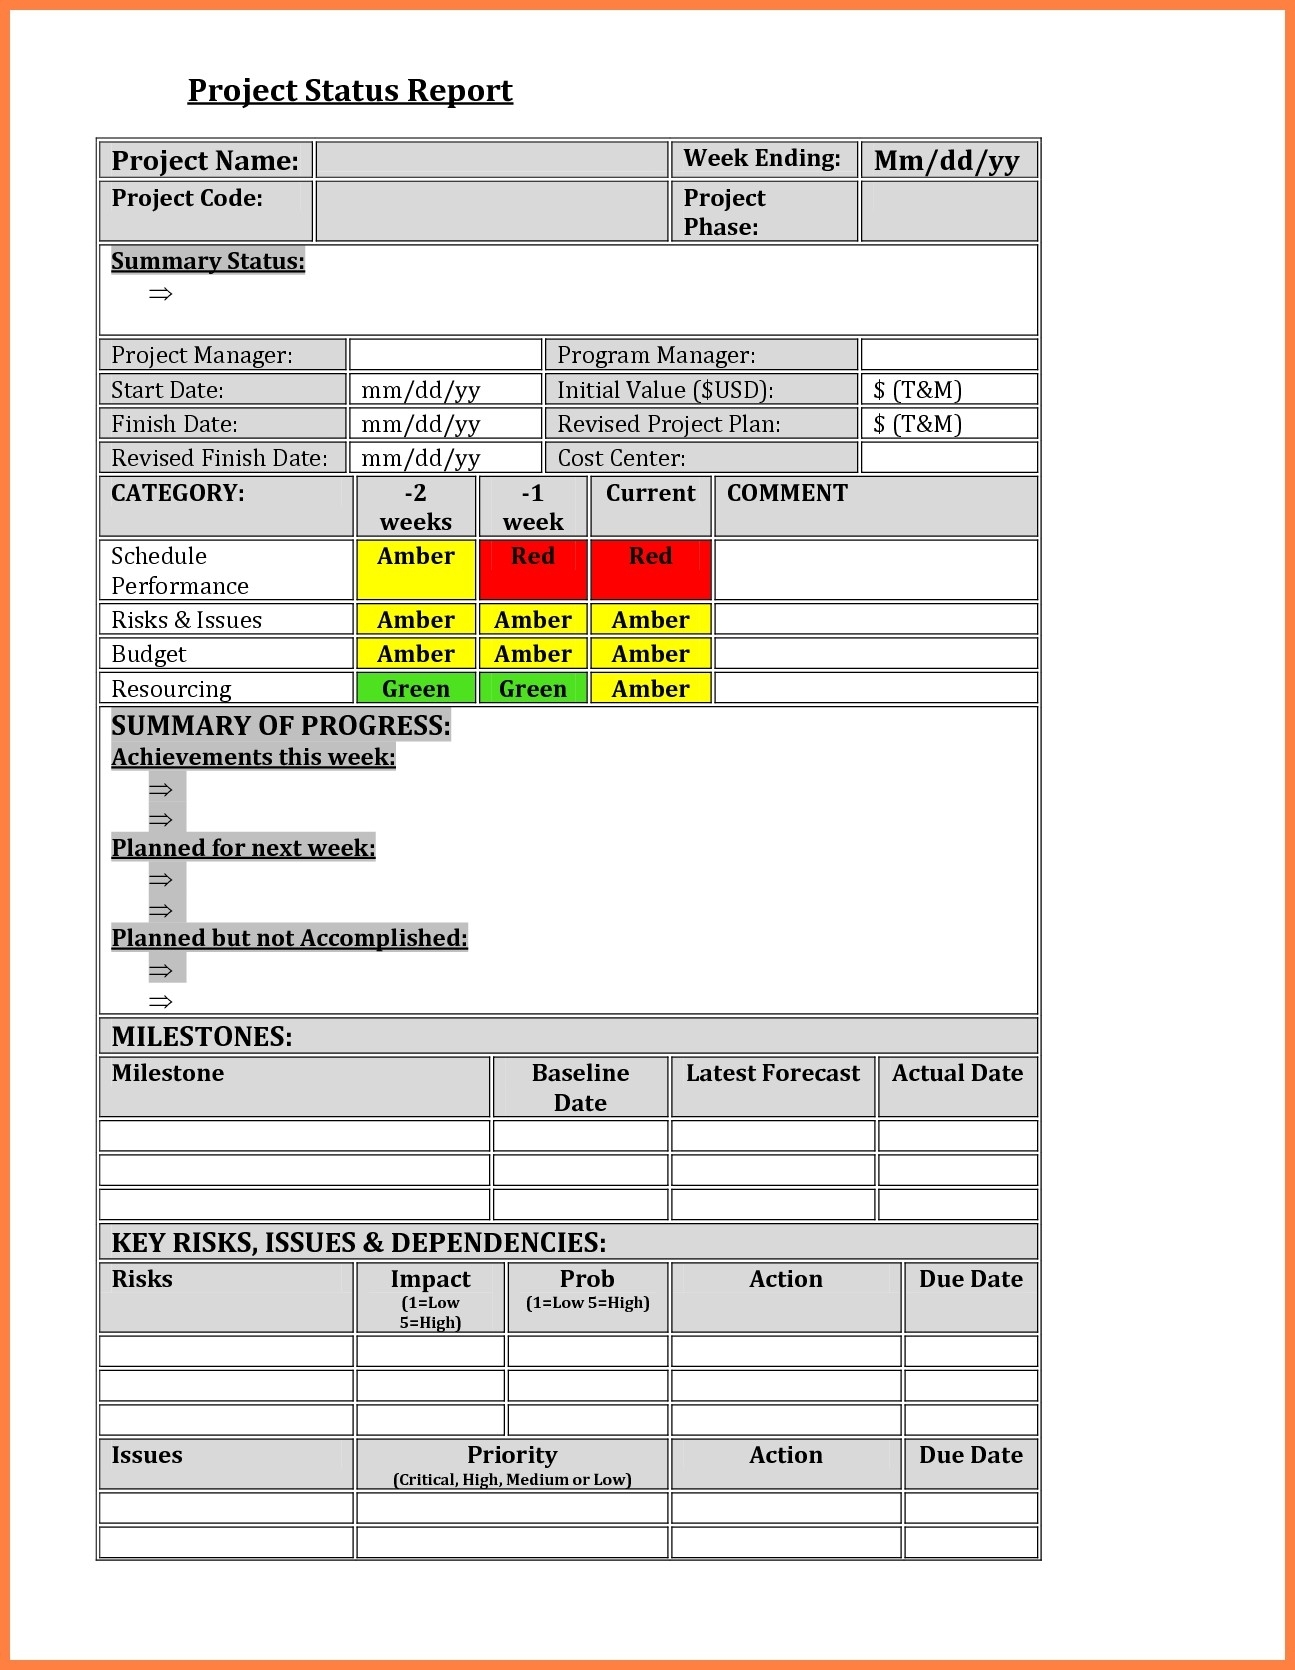 Weekly Status Report Template Excel | Qualads For Project Weekly Status Report Template Excel